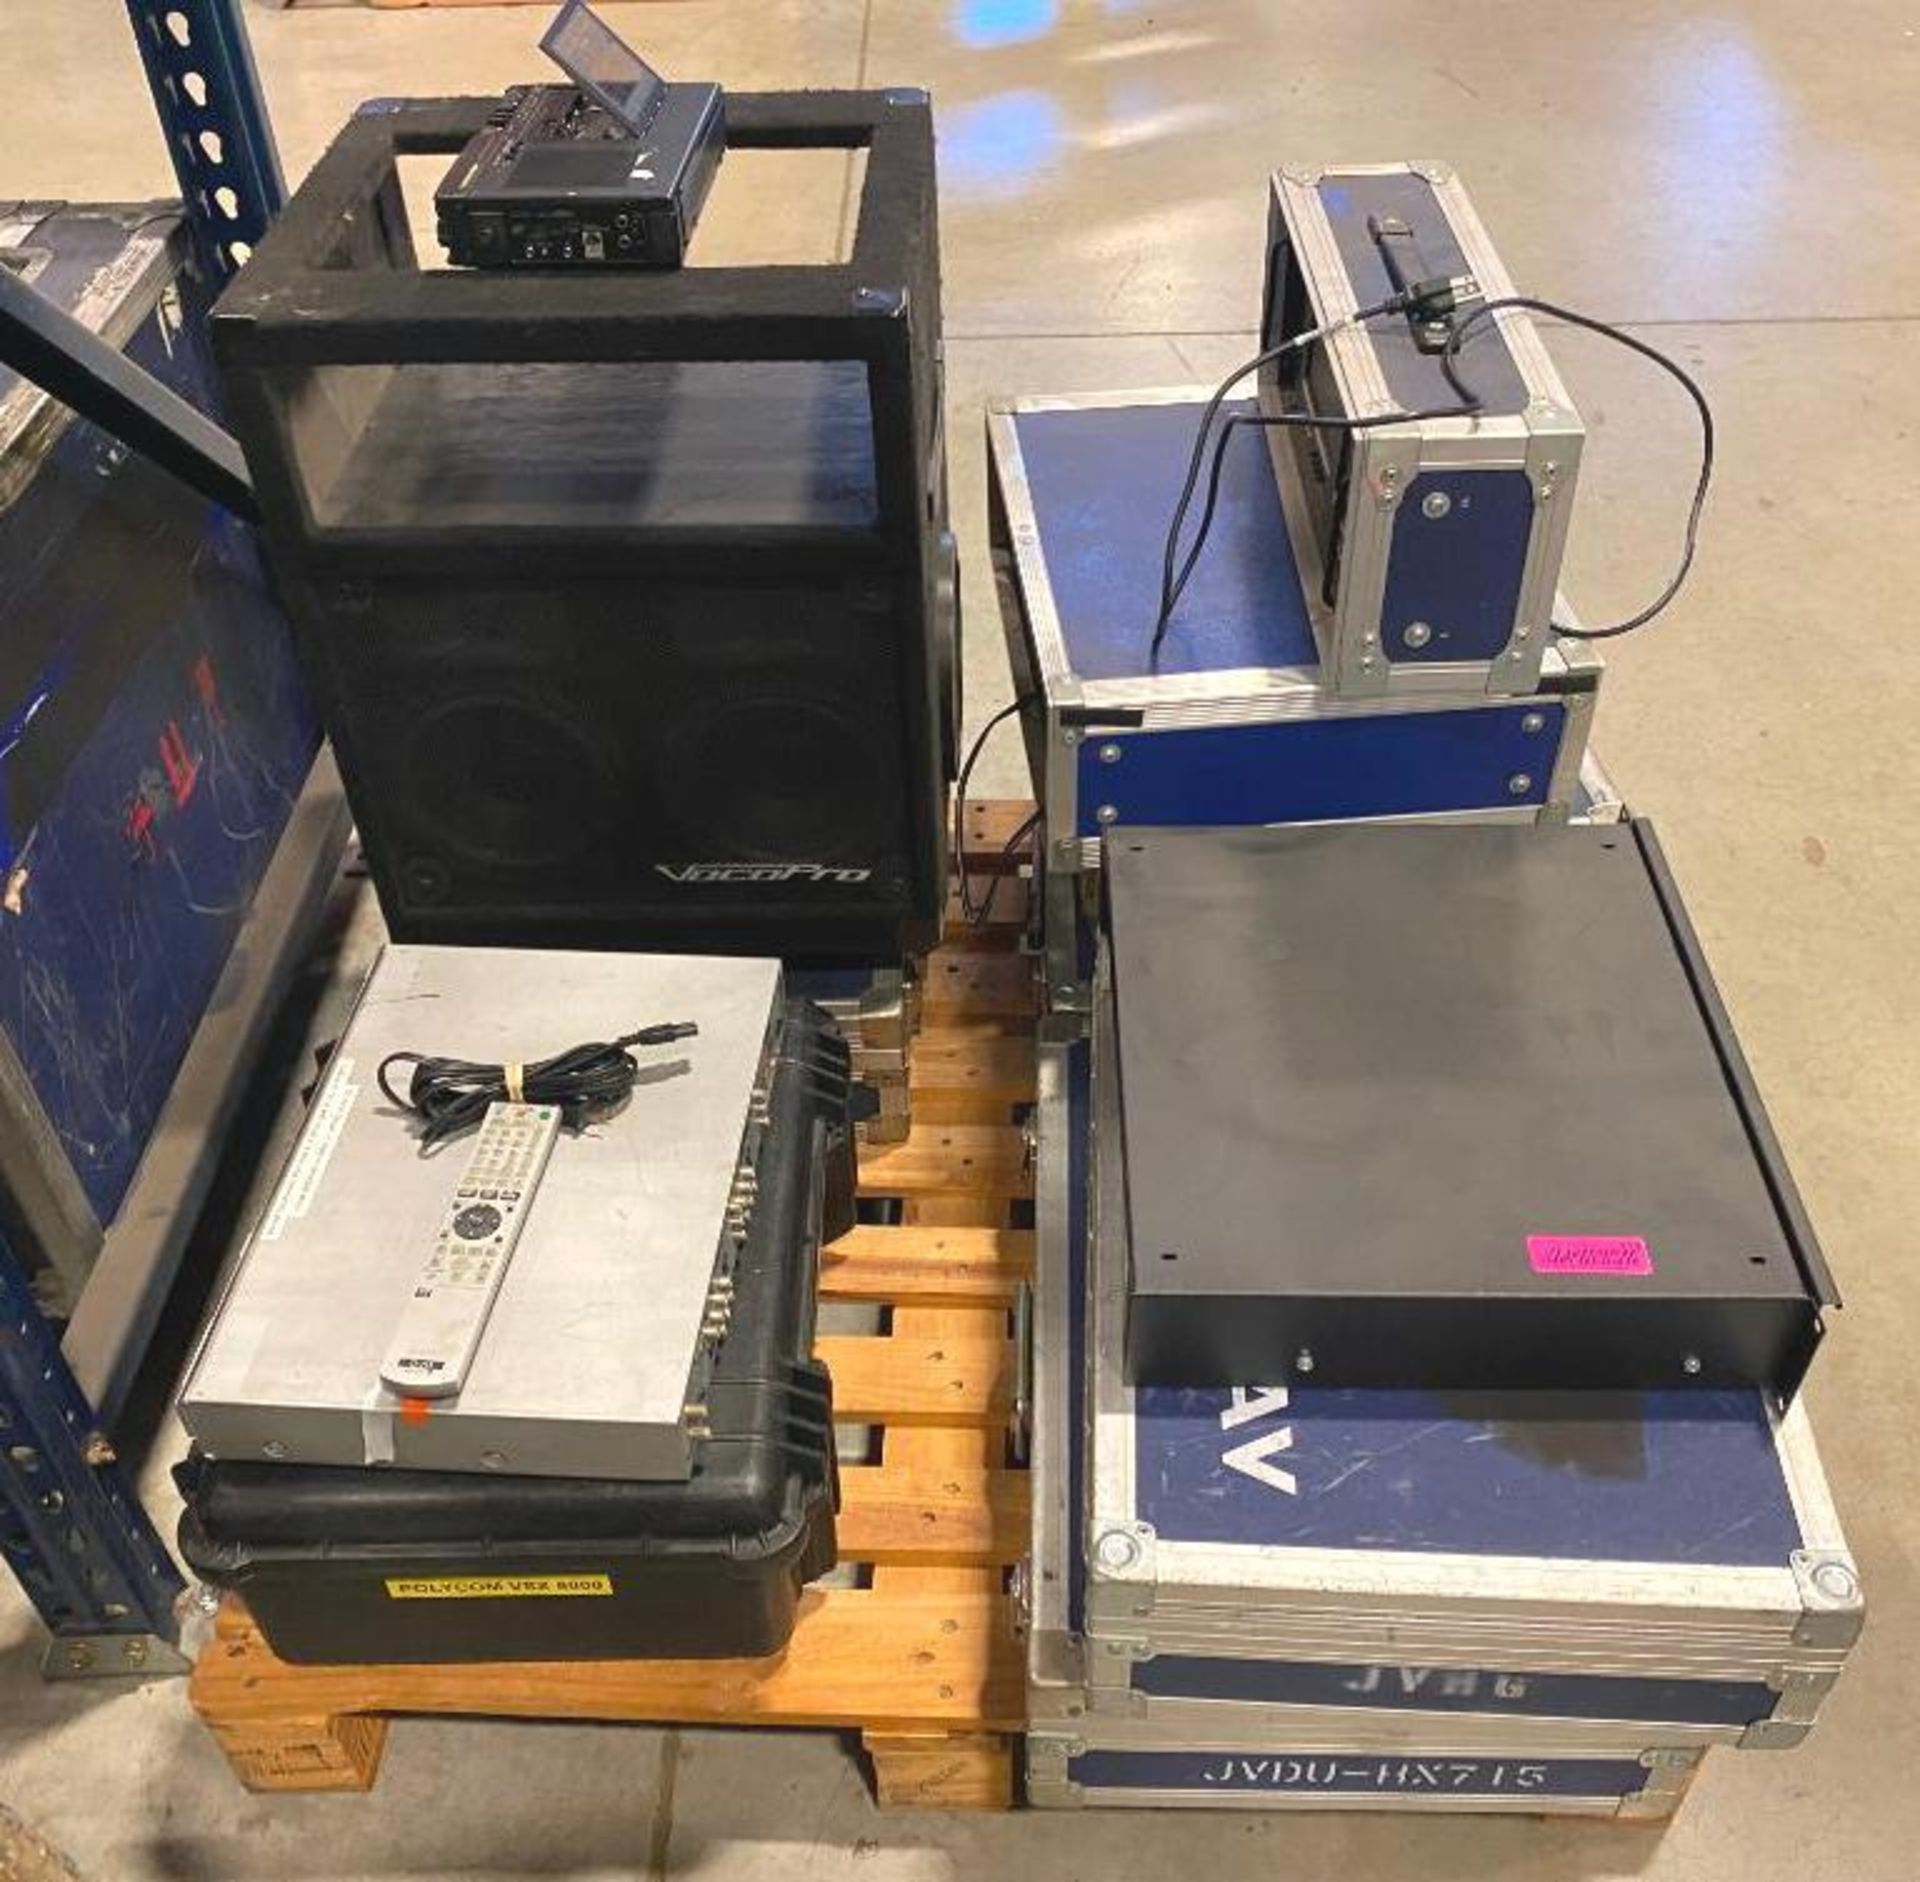 DESCRIPTION ASSORTED AV EQUIPMENT AND ROAD CASES AS SHOWN ADDITIONAL INFO NOT WORKING QUANTITY: X BI